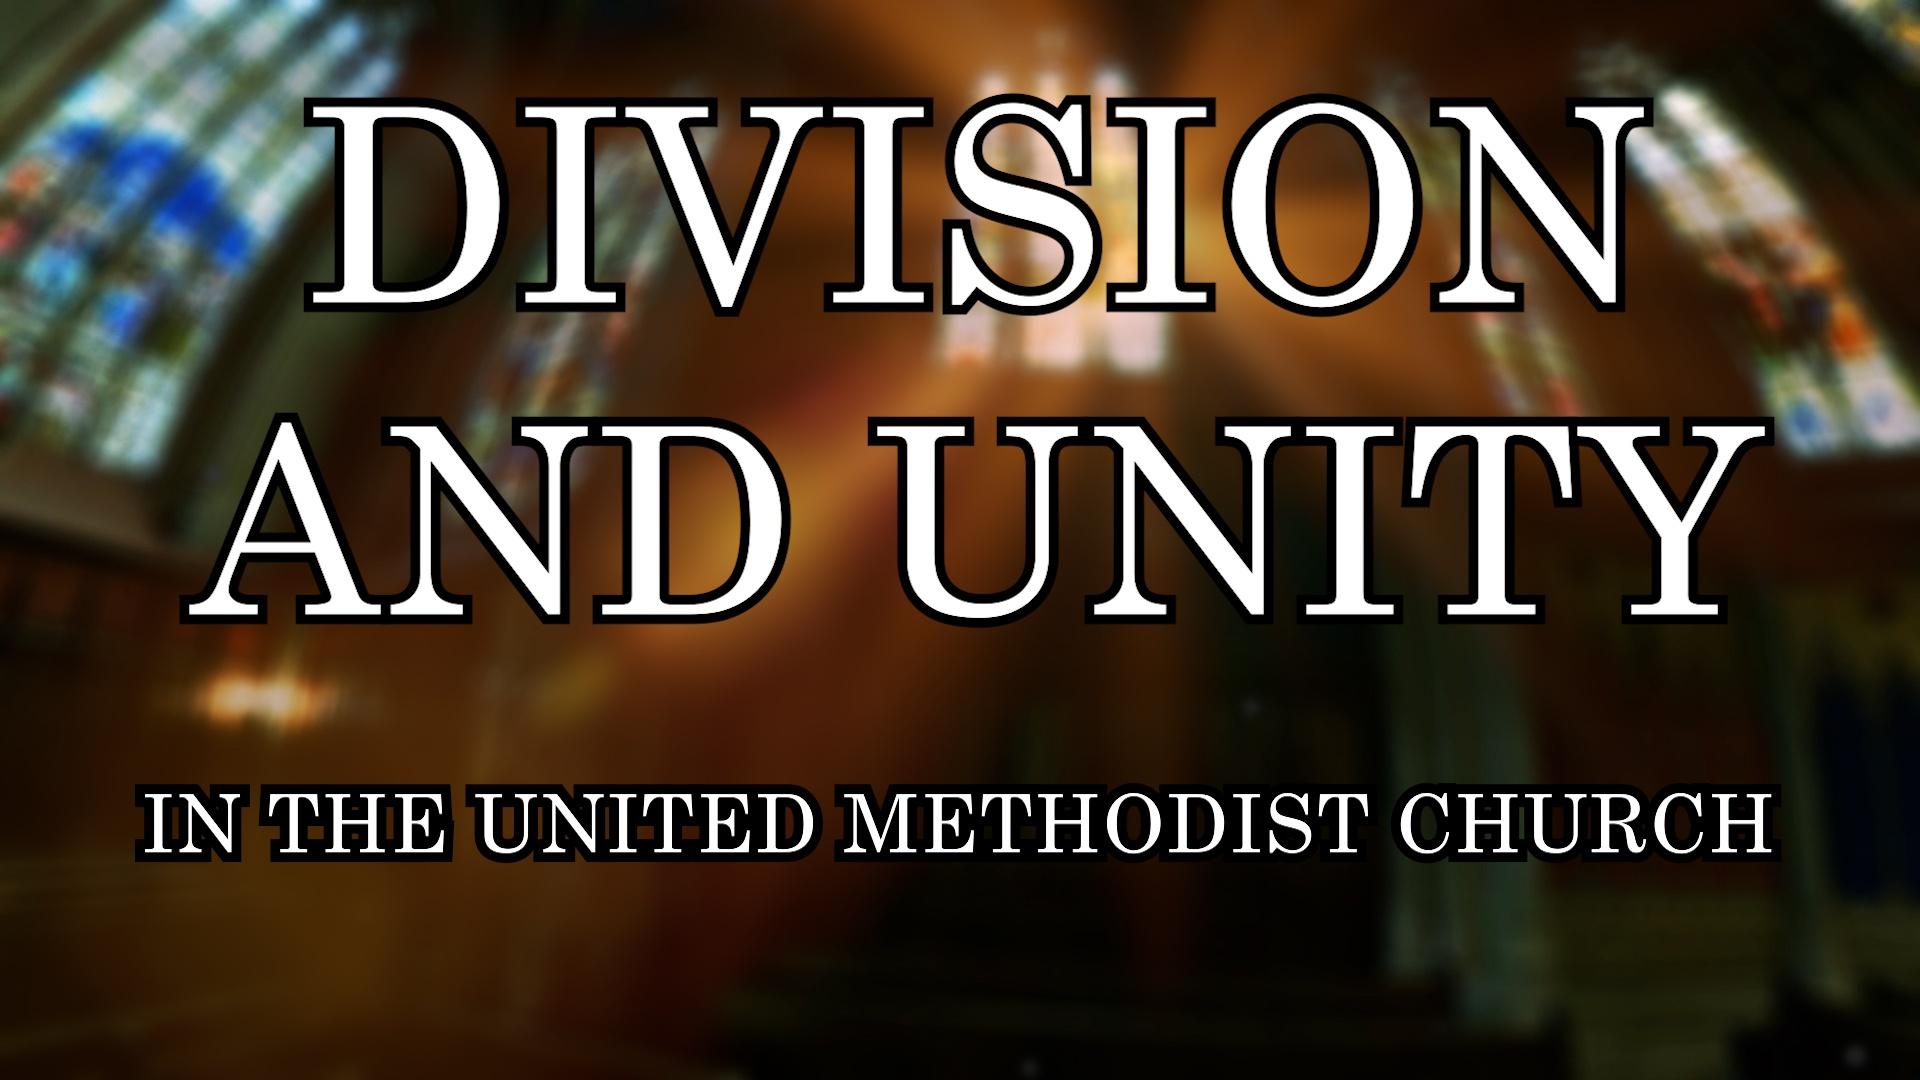 Division and Unity in the United Methodist Church